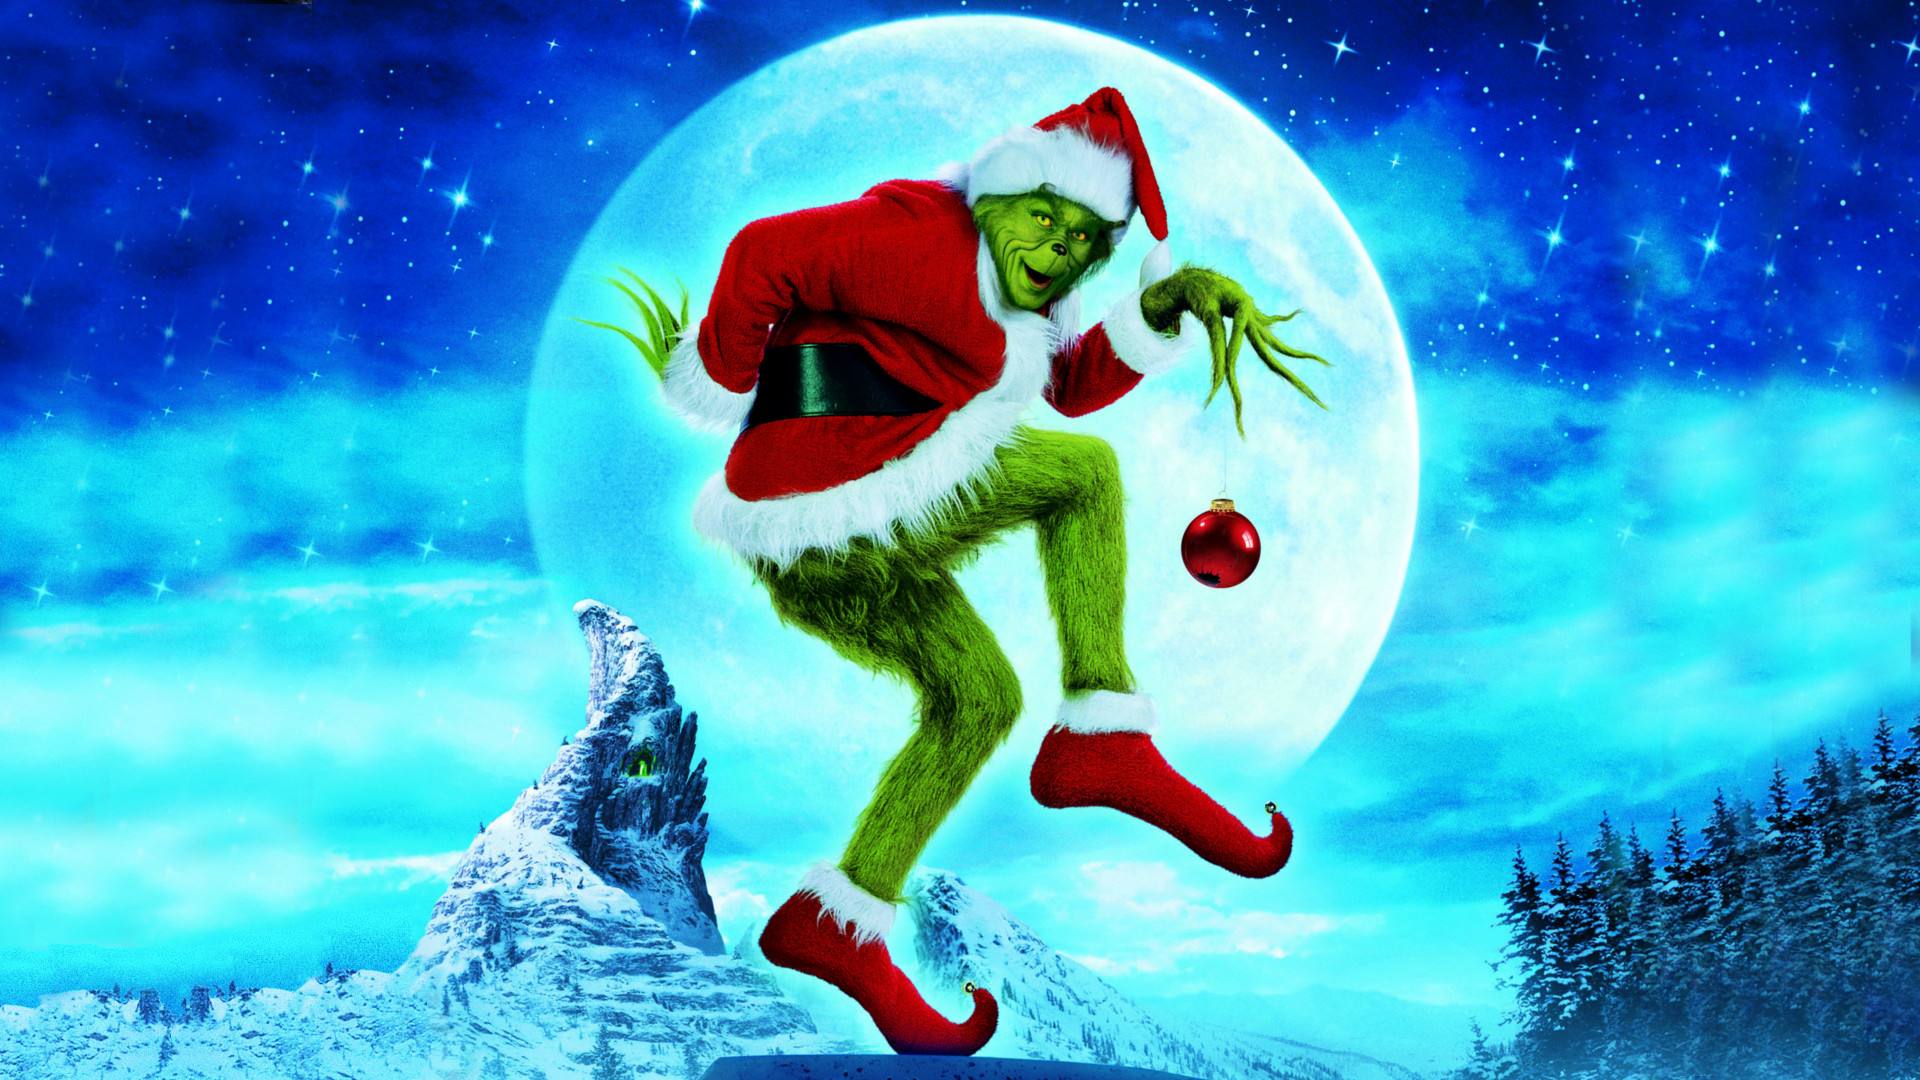 How The Grinch Stole Christmas D Wallpaper